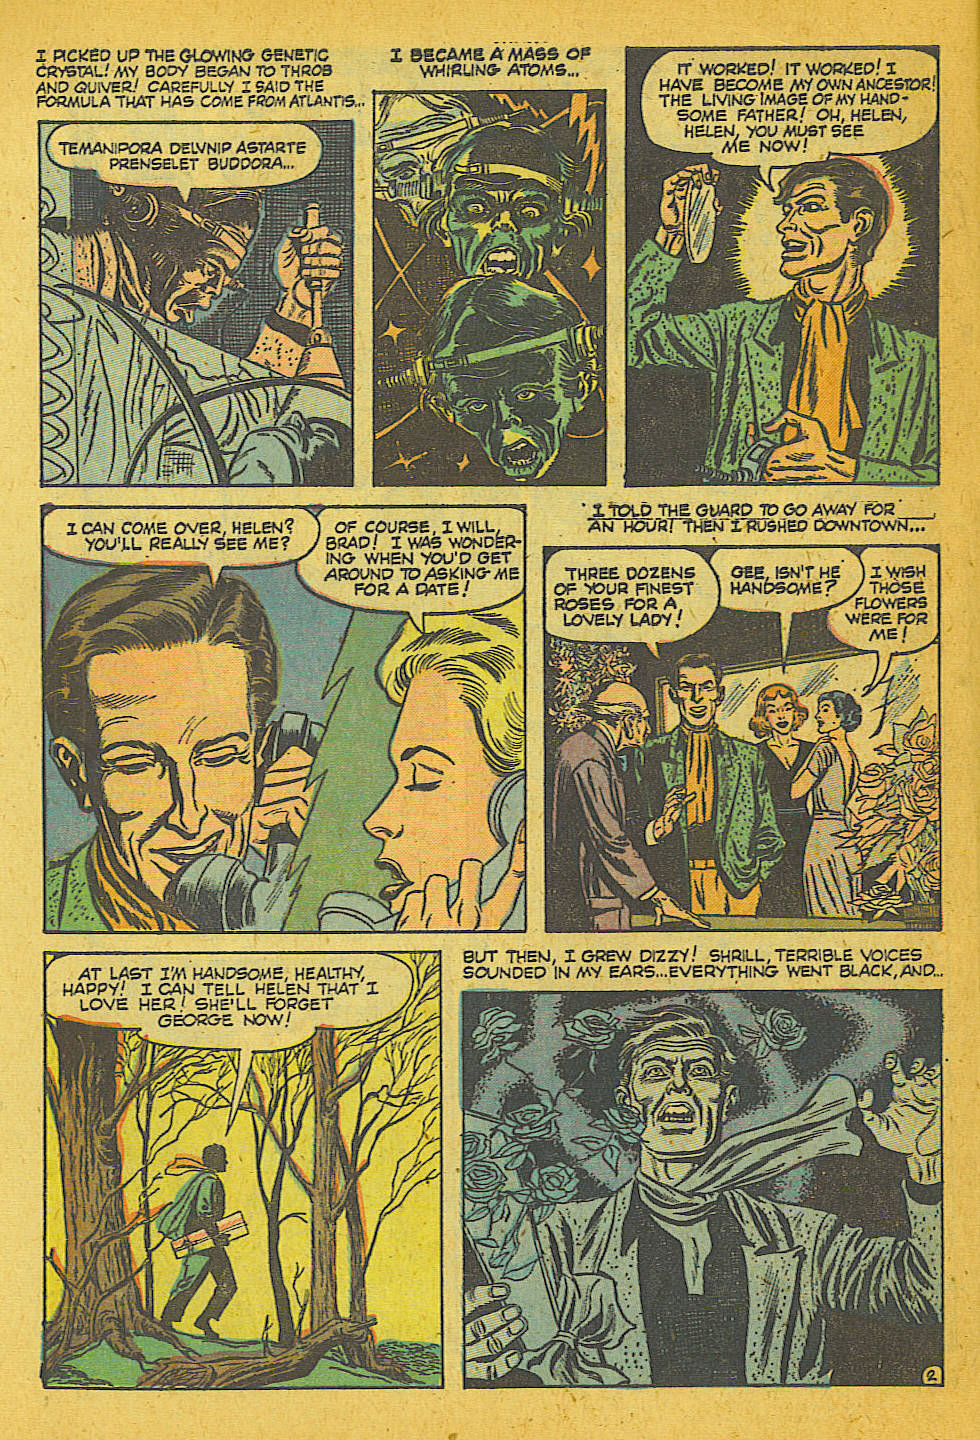 Marvel Tales (1949) 111 Page 2